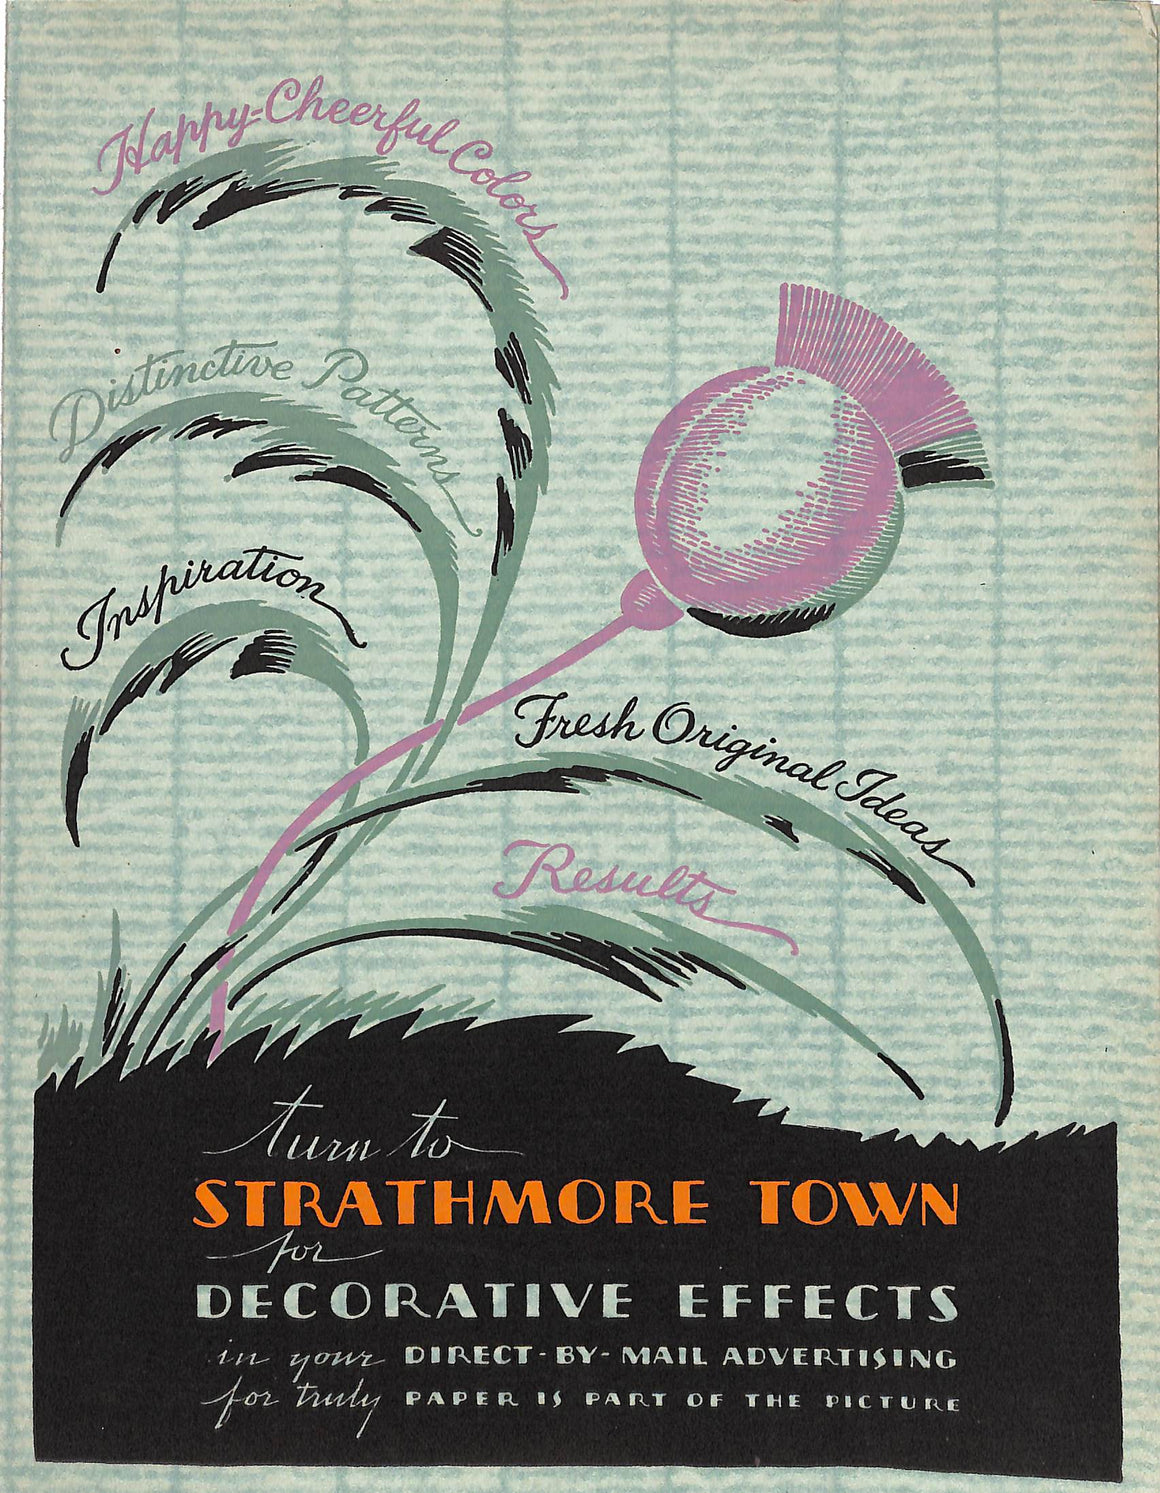 "Turn To Strathmore Town For Decorative Effects" 1928